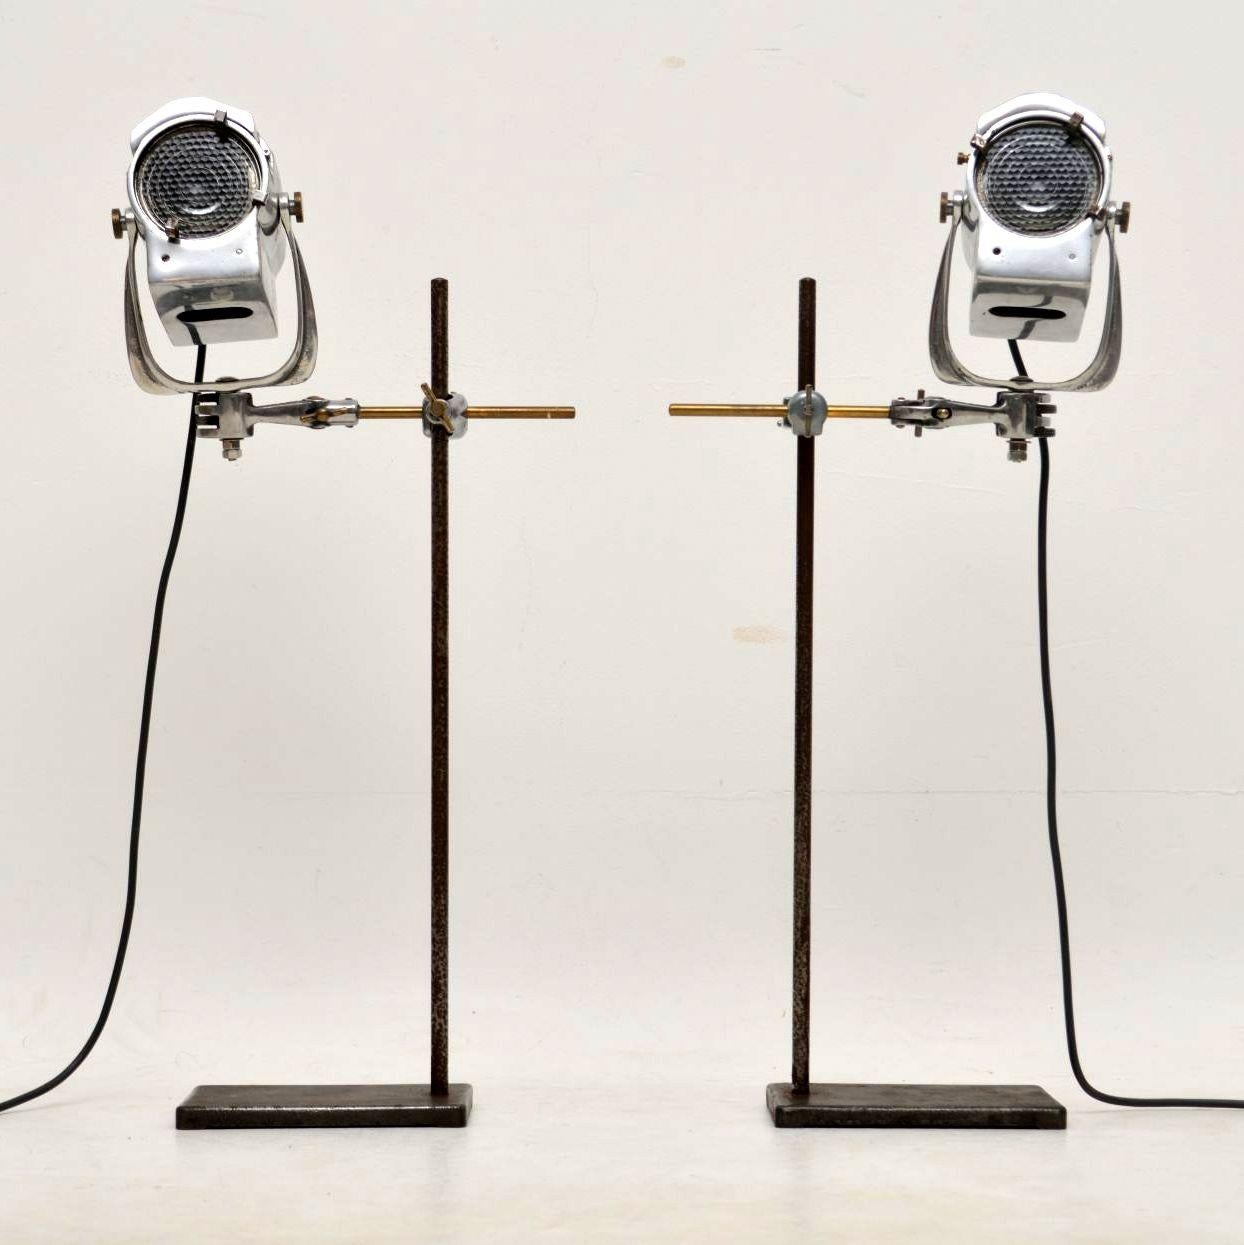 An amazing pair of vintage table lamps / spotlights, these date from circa 1950s-1960s. They were made by Century Lighting Inc. in New York, they have been re-wired and are in good working order. The stands were probably added later but they are